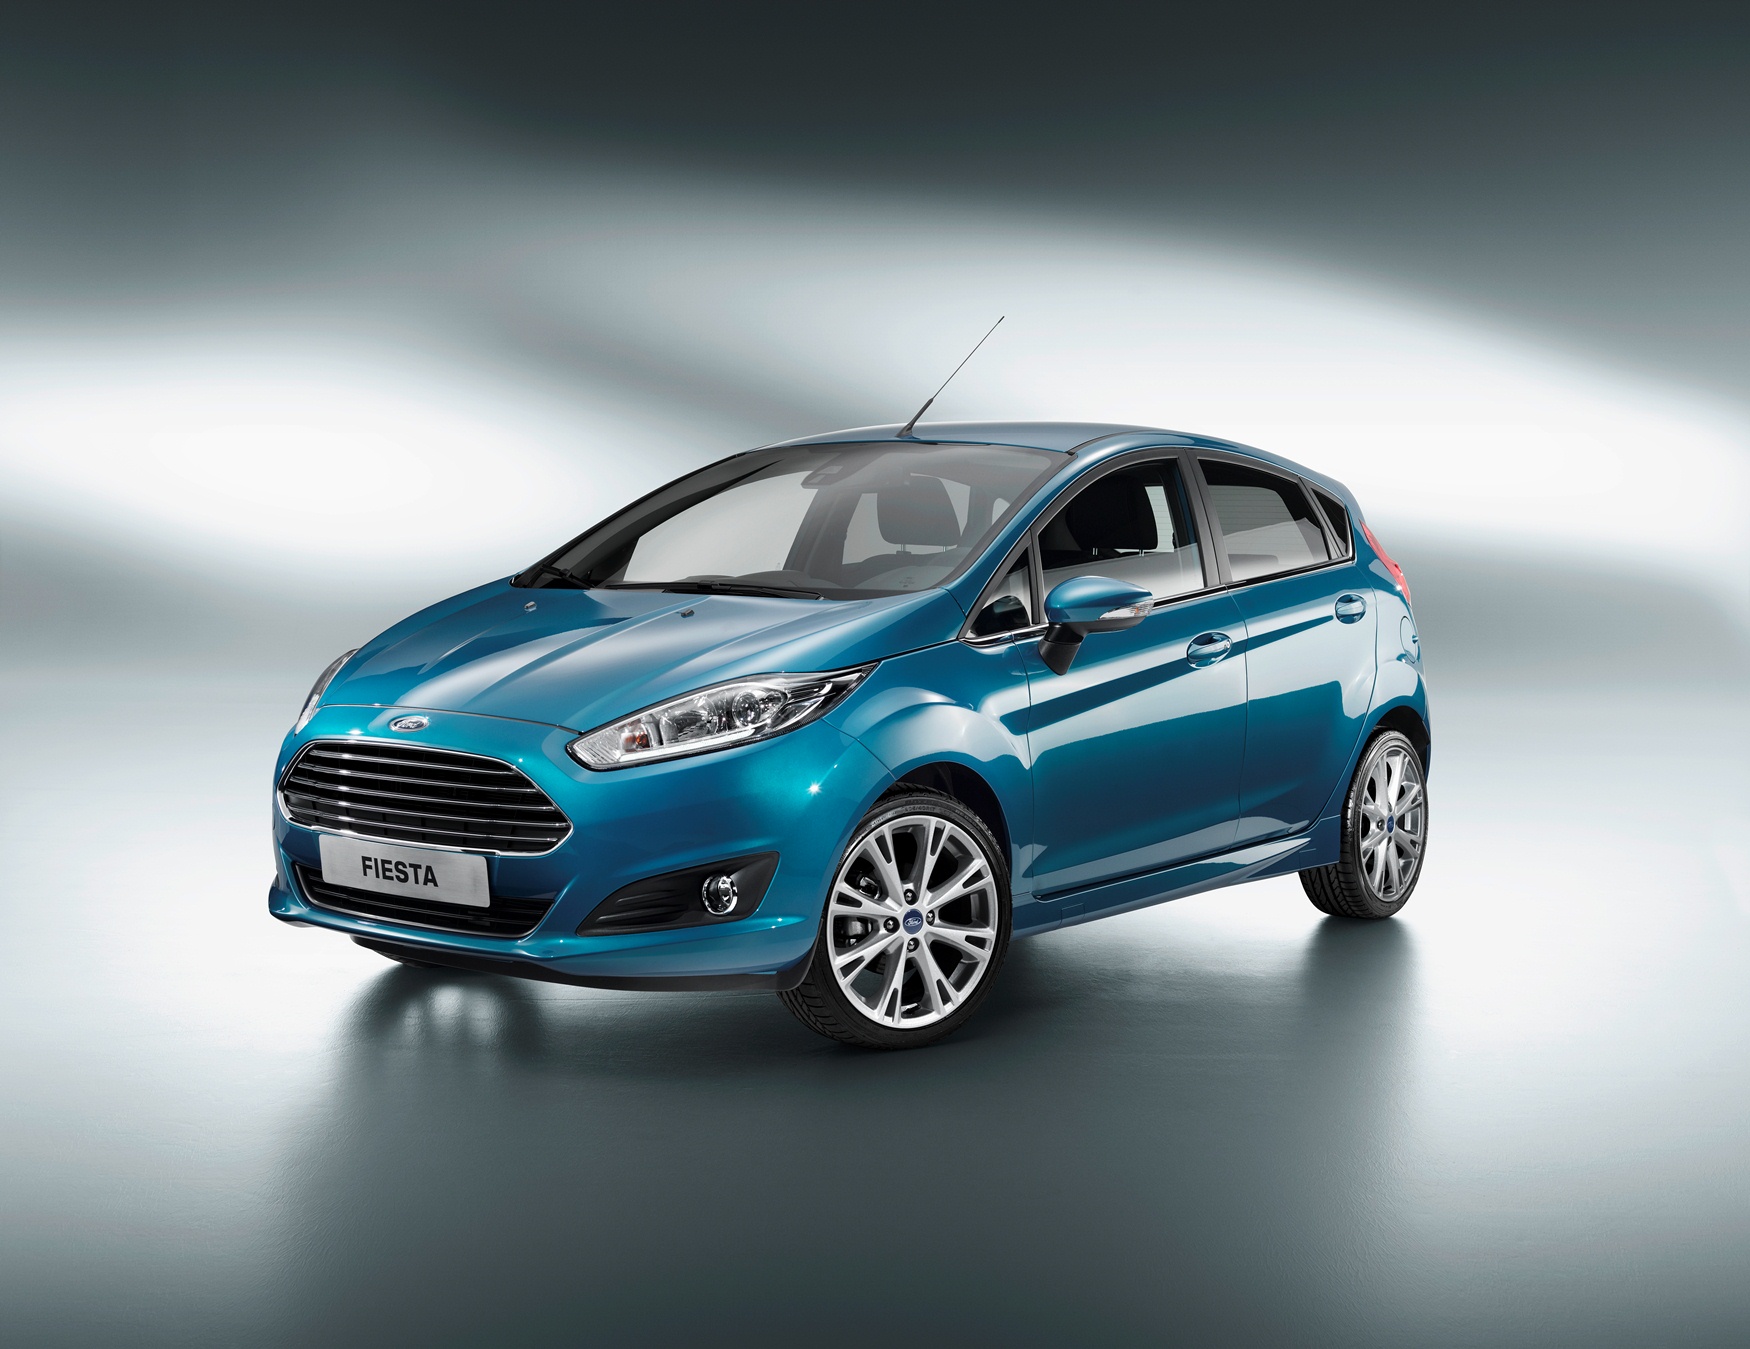 Ford Fiesta 1.0T Titanium Automatic (2018) Review